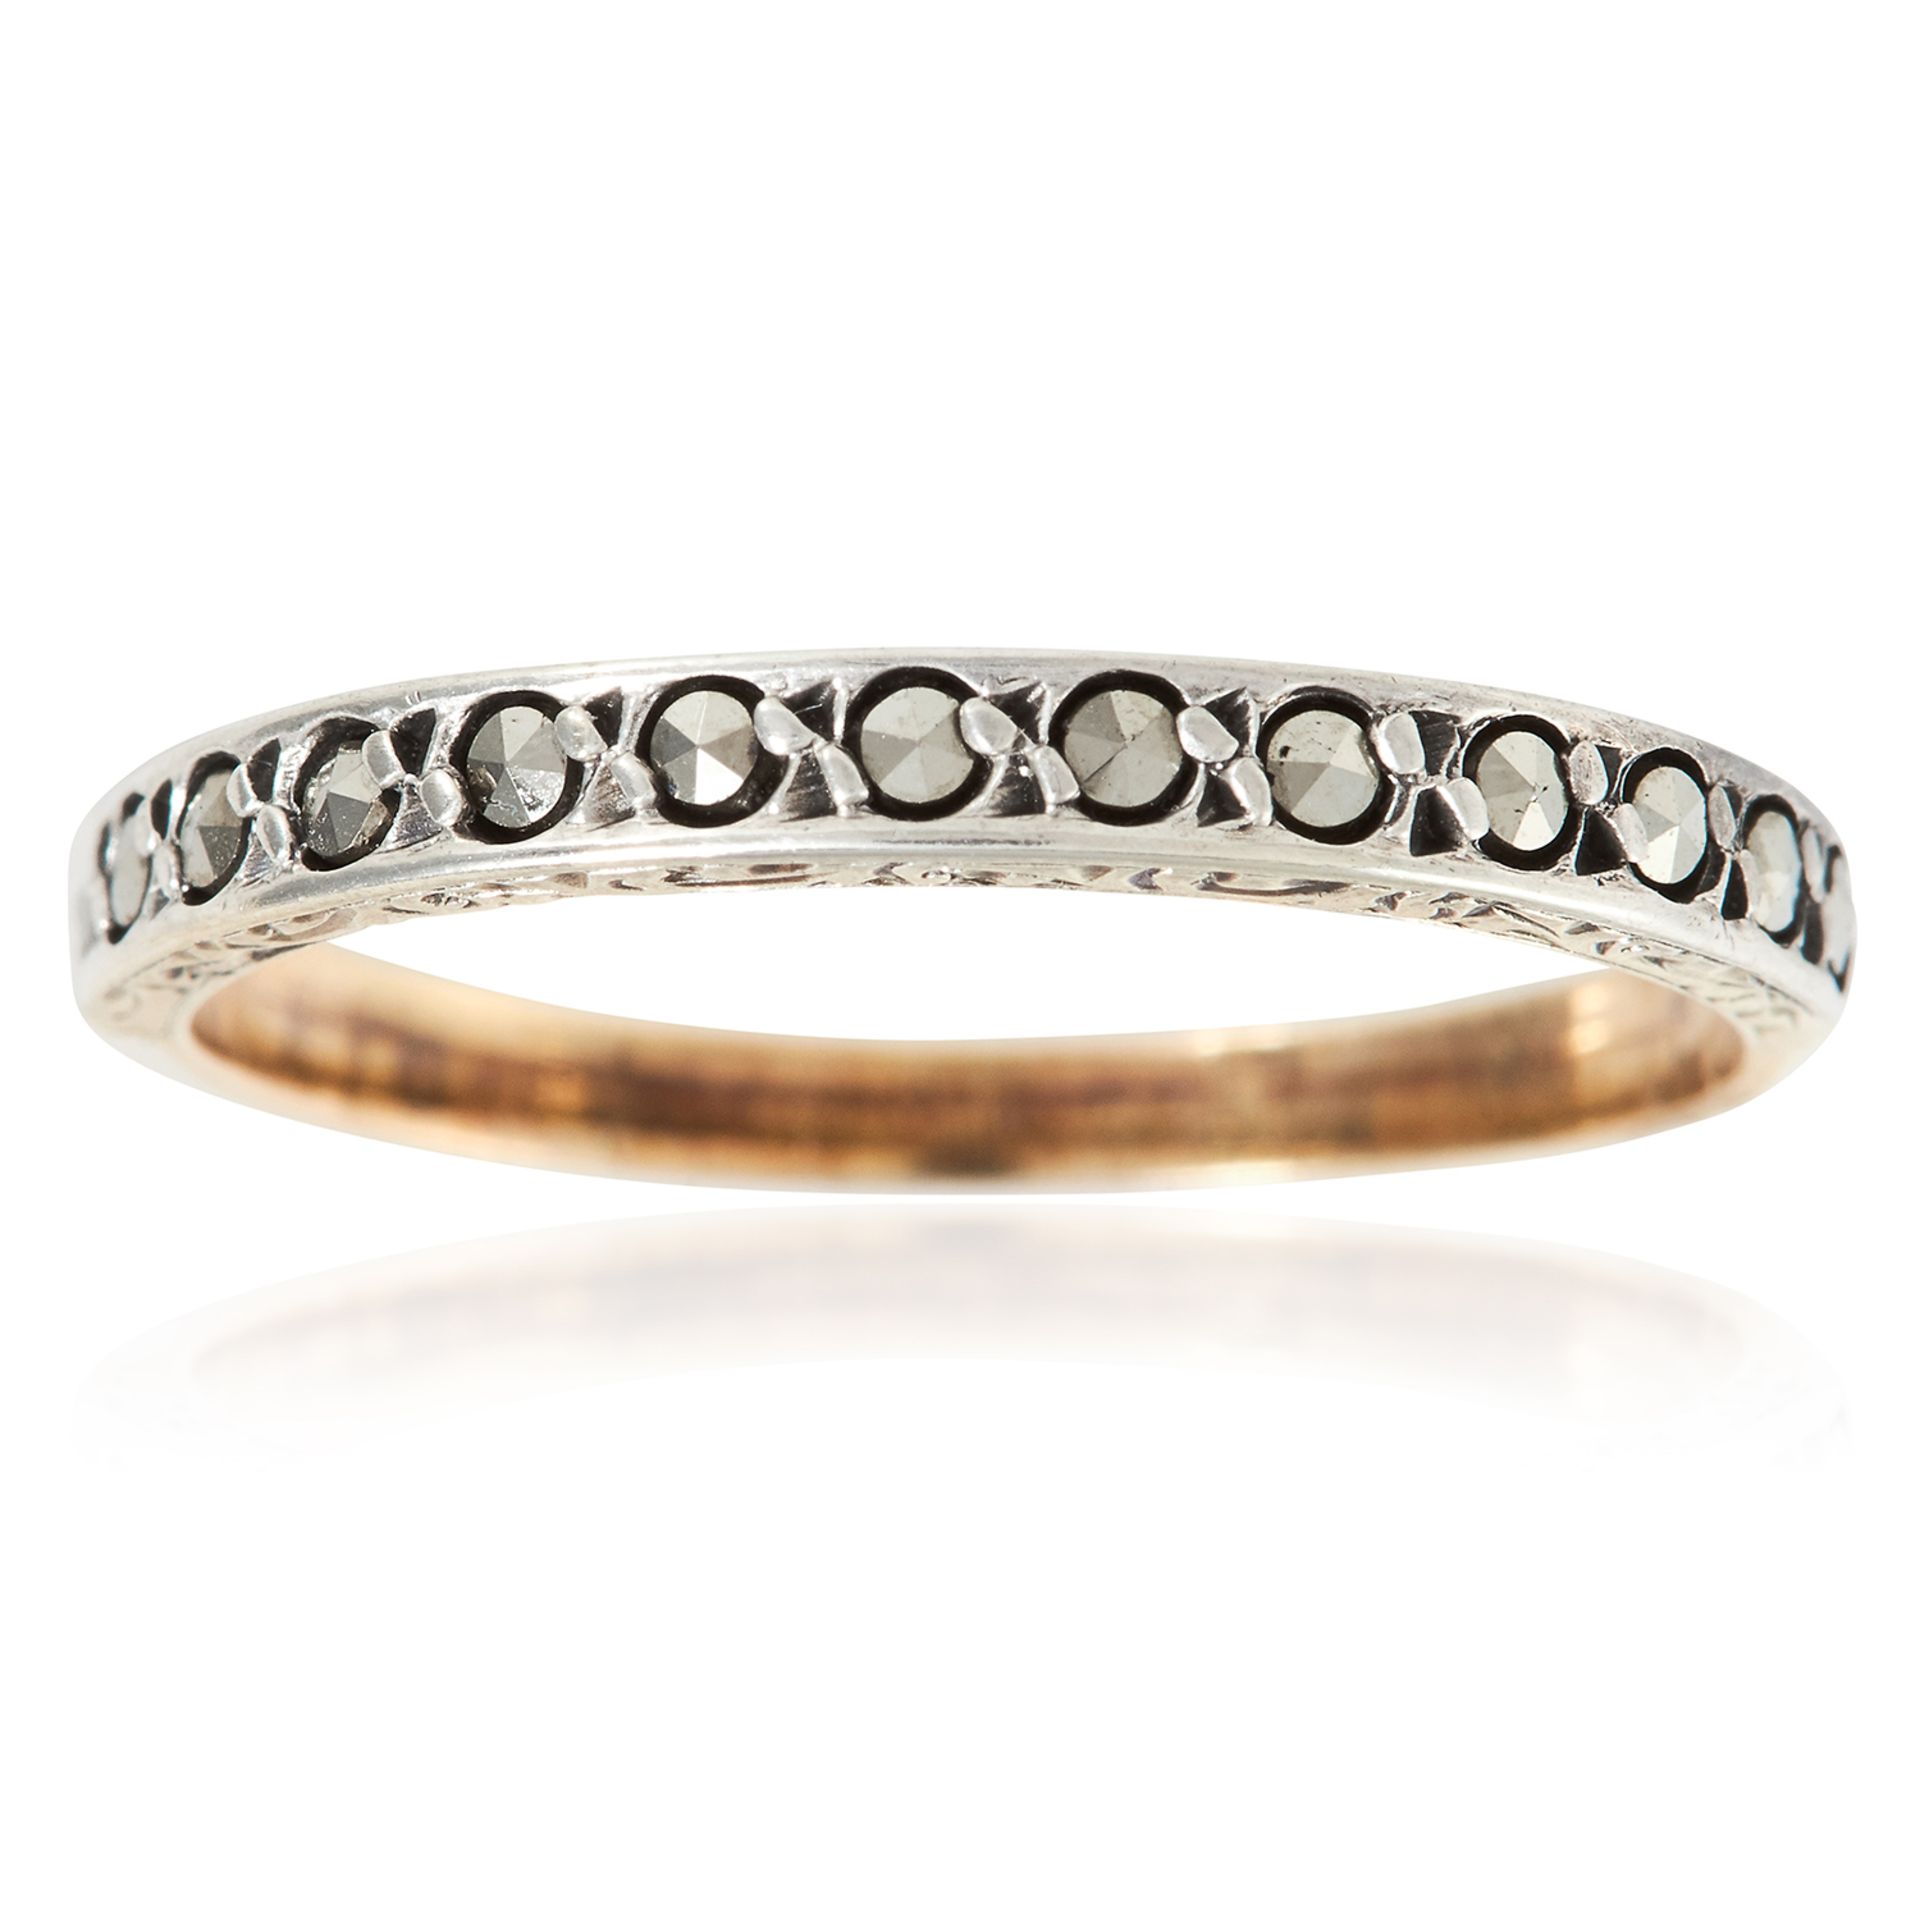 AN ANTIQUE MARCASITE RING in yellow gold, set with a single row of marcasite, unmarked, size O /